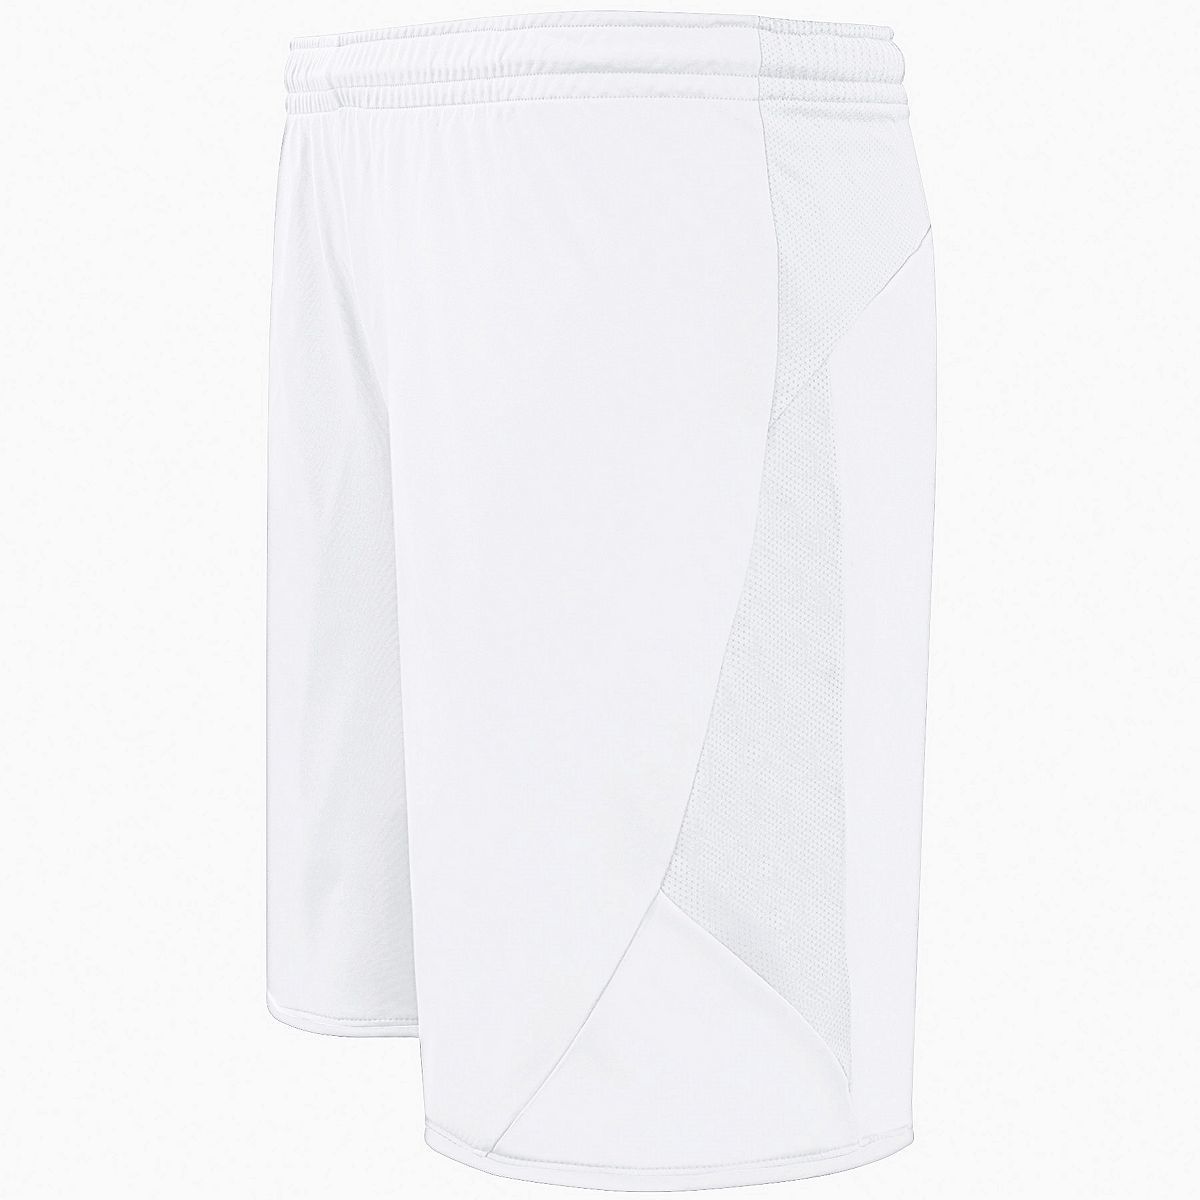 High 5 Youth Club Shorts in White/White  -Part of the Youth, Youth-Shorts, High5-Products, Soccer, All-Sports-1 product lines at KanaleyCreations.com